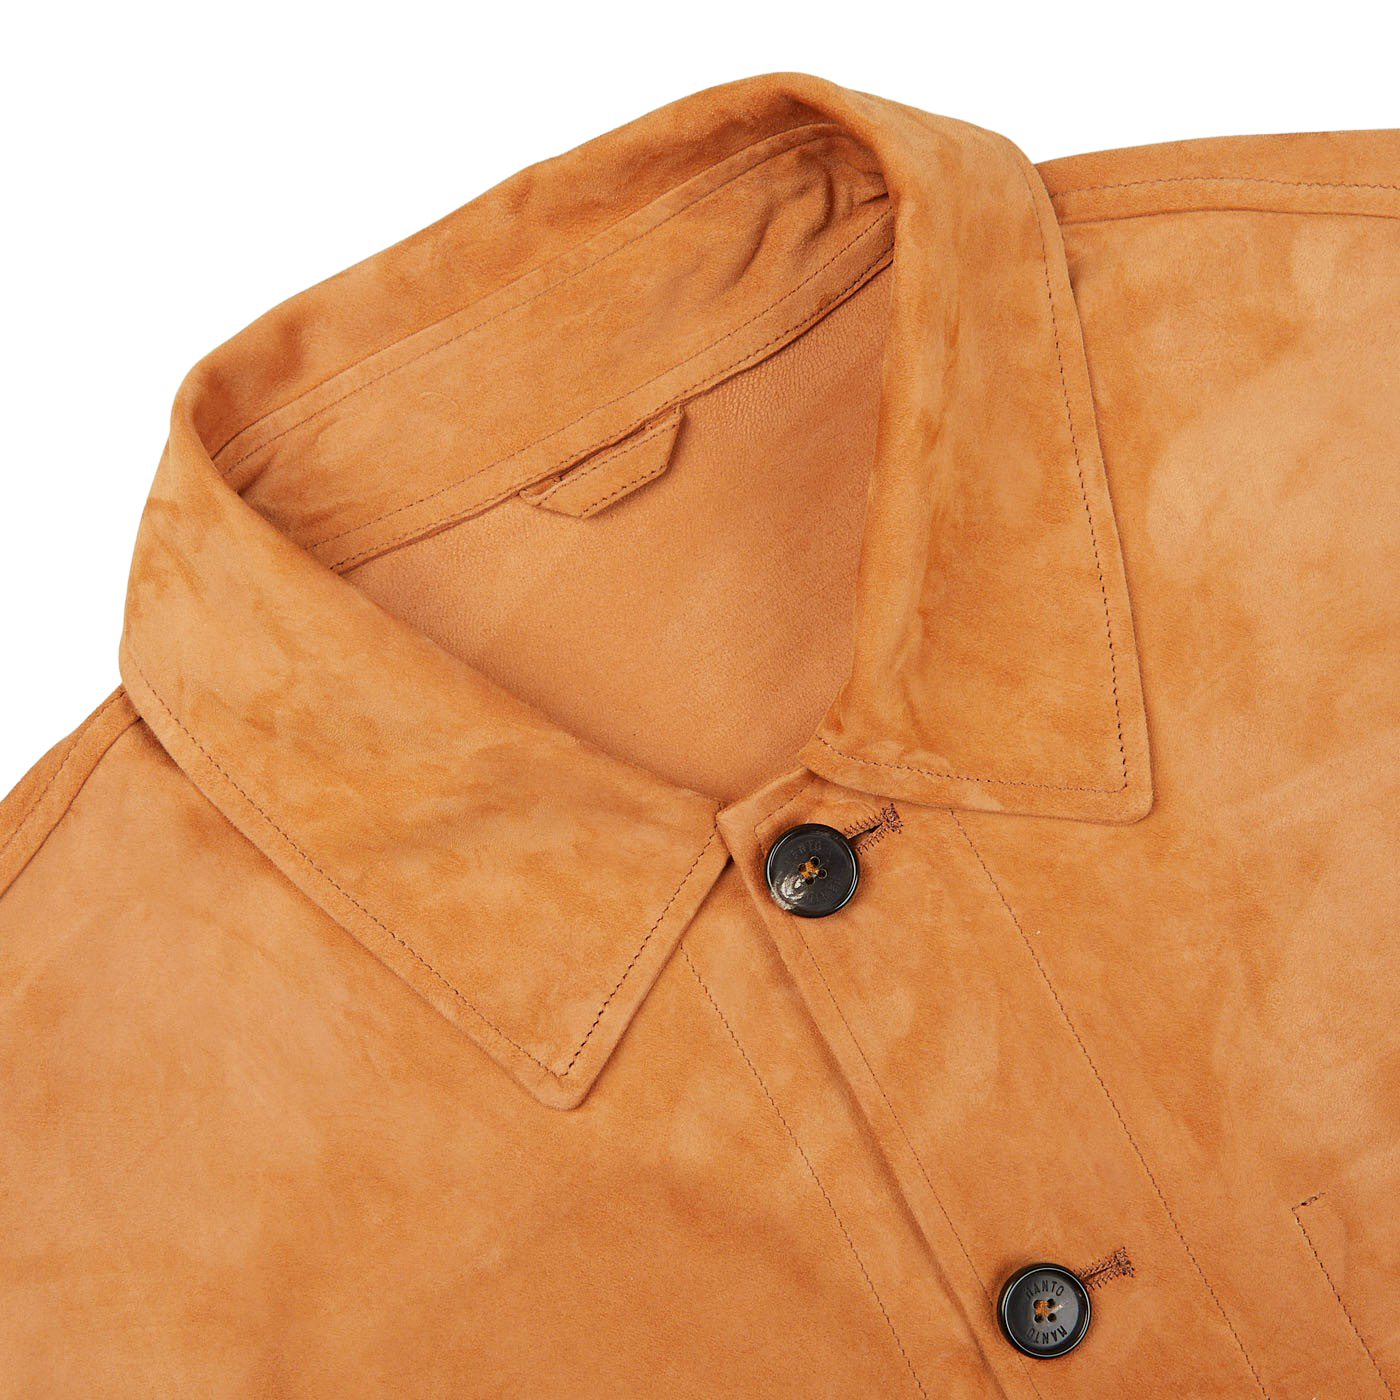 A close up image of a Manto Bright Tan Suede Leather Overshirt.